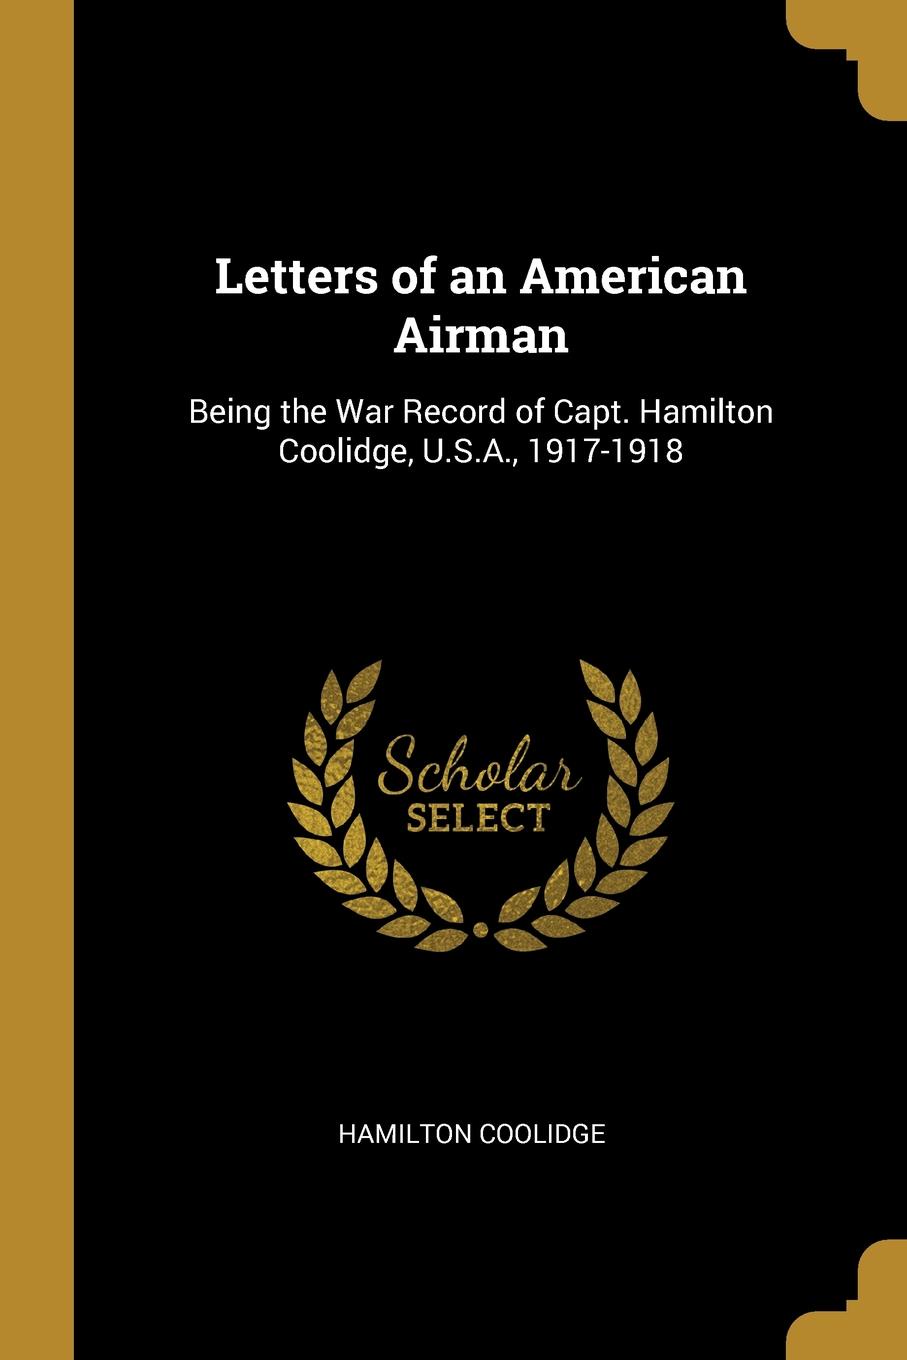 Letters of an American Airman. Being the War Record of Capt. Hamilton Coolidge, U.S.A., 1917-1918